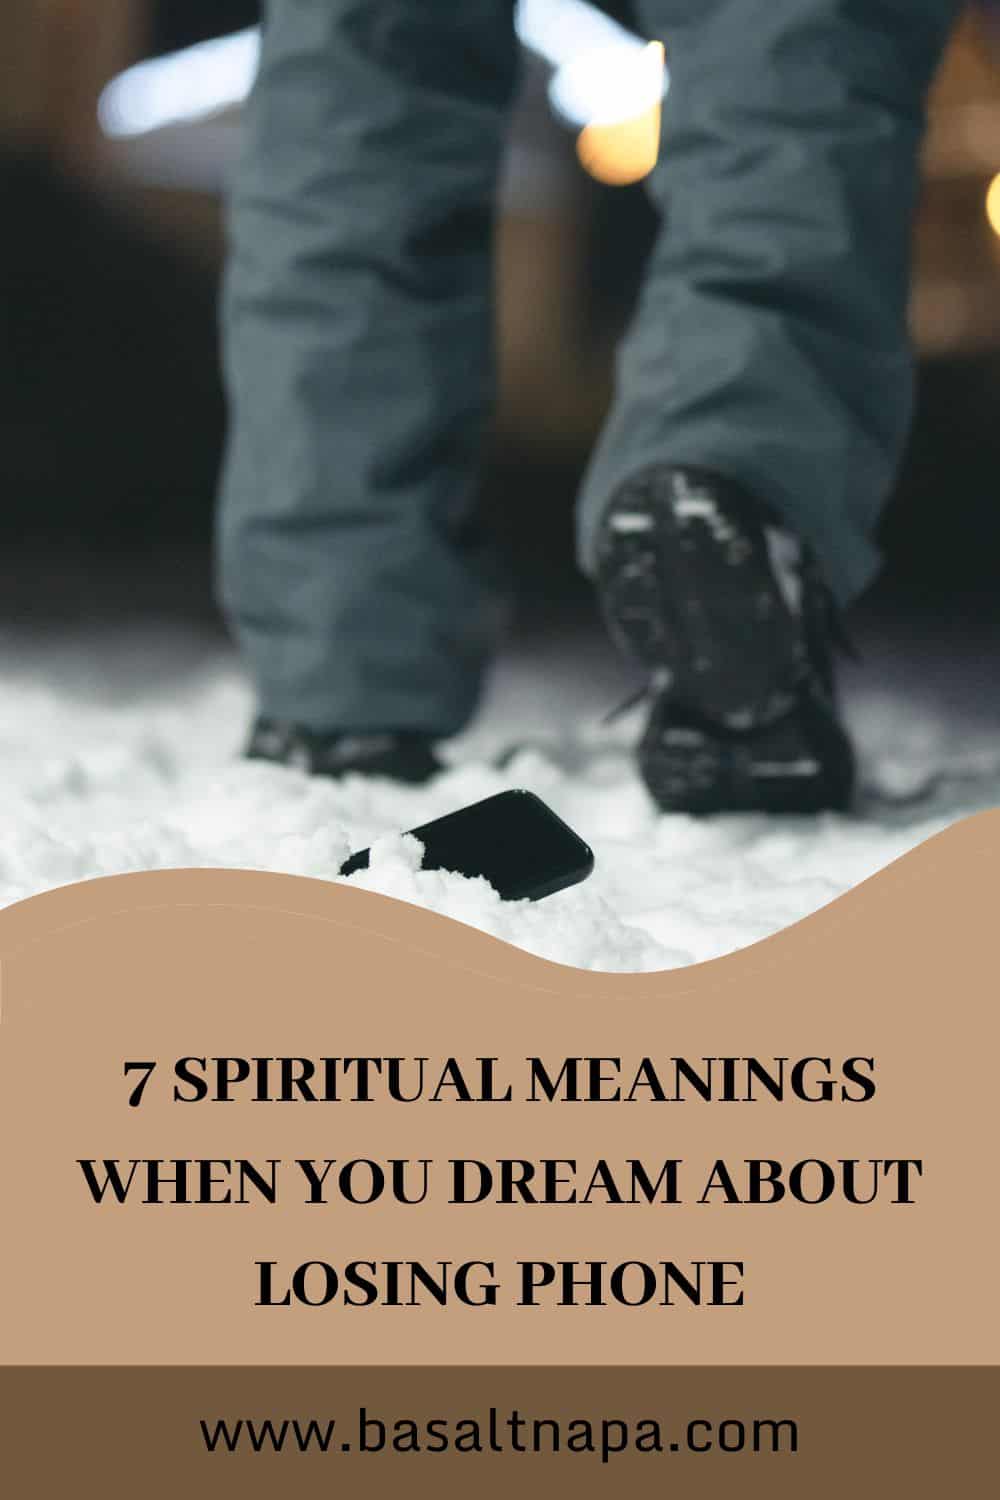 7 Spiritual Meanings When You Dream About Losing Phone